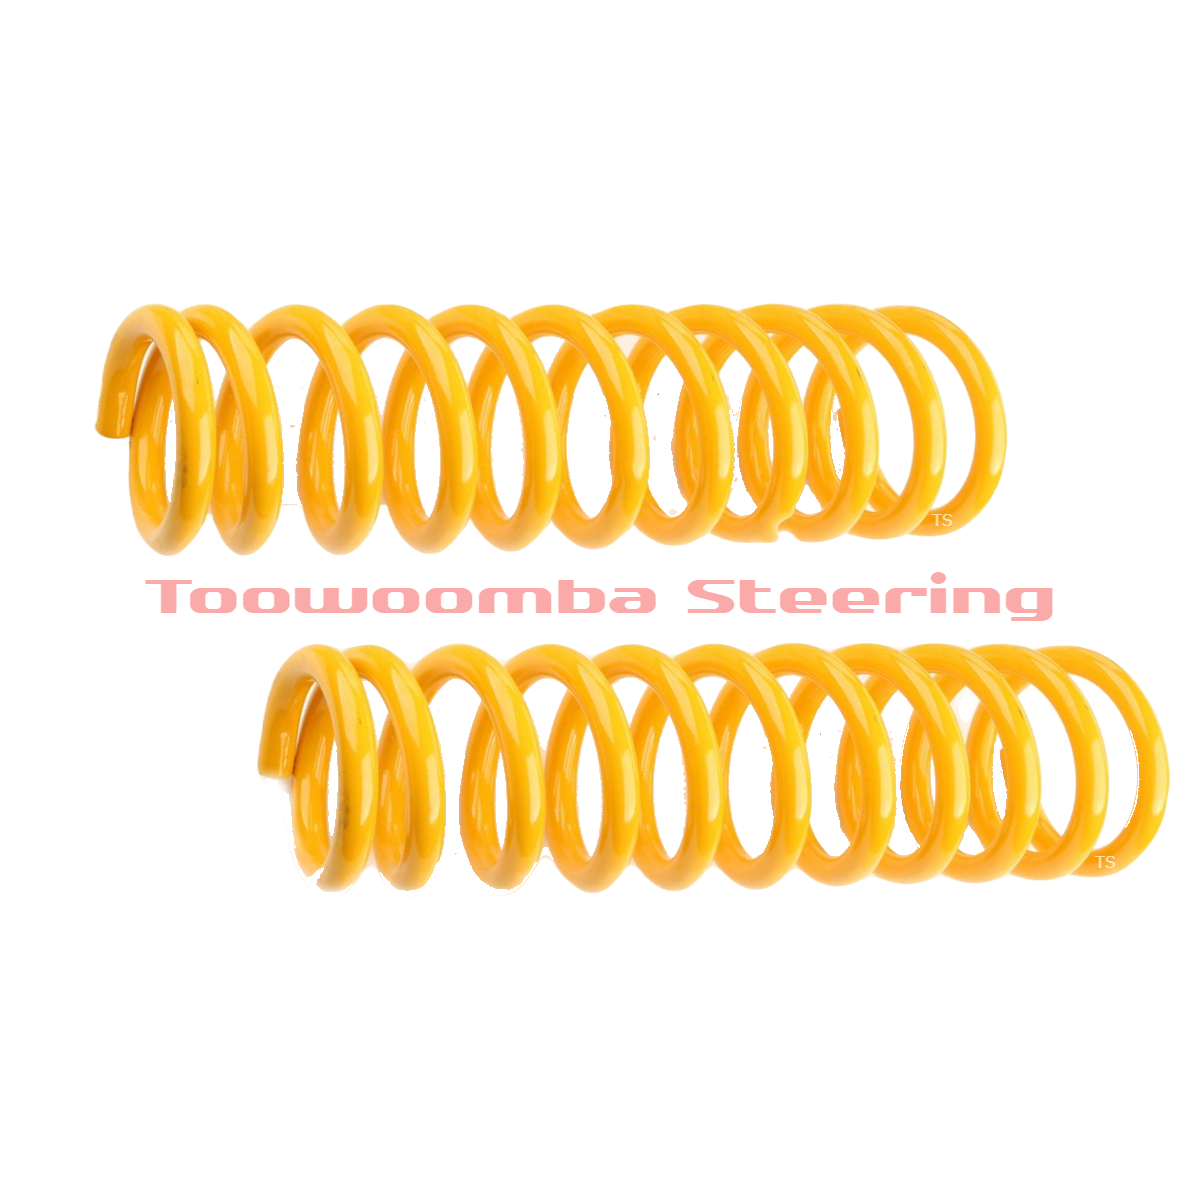 Rear Standard Height King Coil Springs - Ideal for - Holden Commodore VT; VX; VY; VZ 8CYL WAGON 97-06, Commodore VU; VY 6CYL UTE 01-7/04, Commodore VU; VY; VZ 8CYL – UTE 01-07, Commodore VZ 6CYL UTE & WAGON 8/04-06 - (KHRS-69)